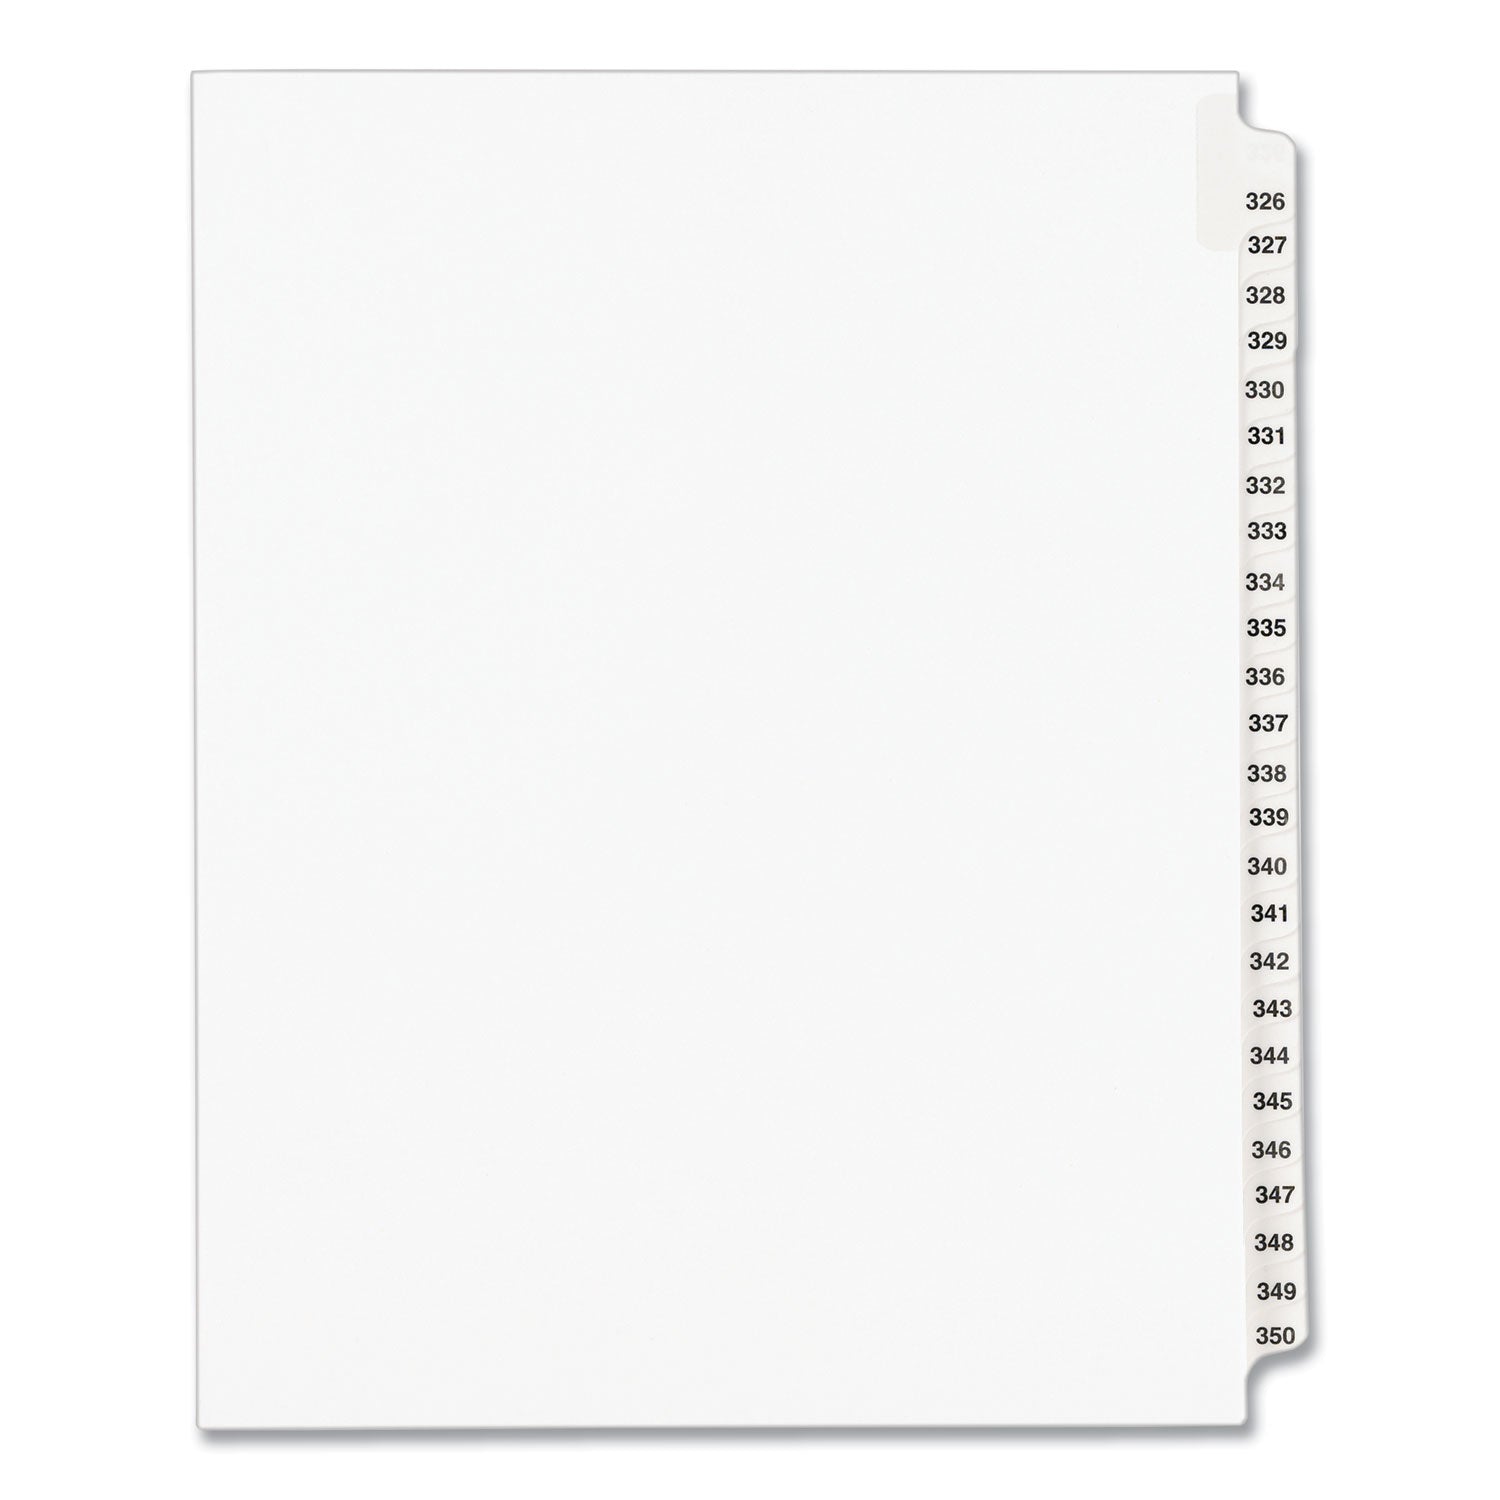 Preprinted Legal Exhibit Side Tab Index Dividers, Avery Style, 25-Tab, 326 to 350, 11 x 8.5, White, 1 Set, (1343) - 